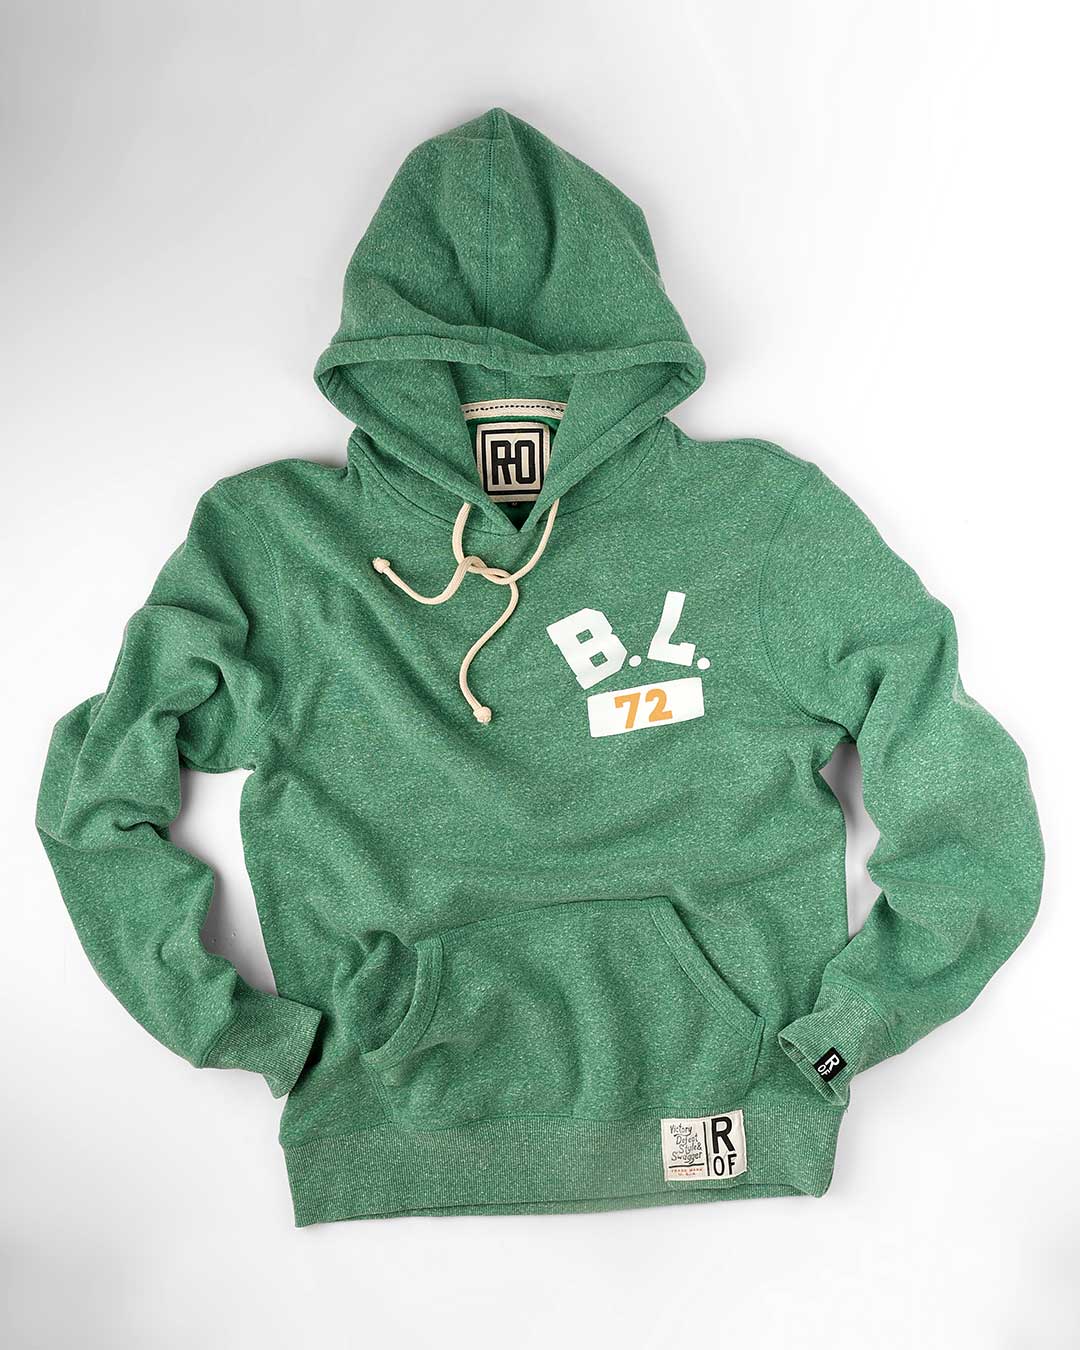 Bruce Lee 1972 Green PO Hoody - Roots of Fight